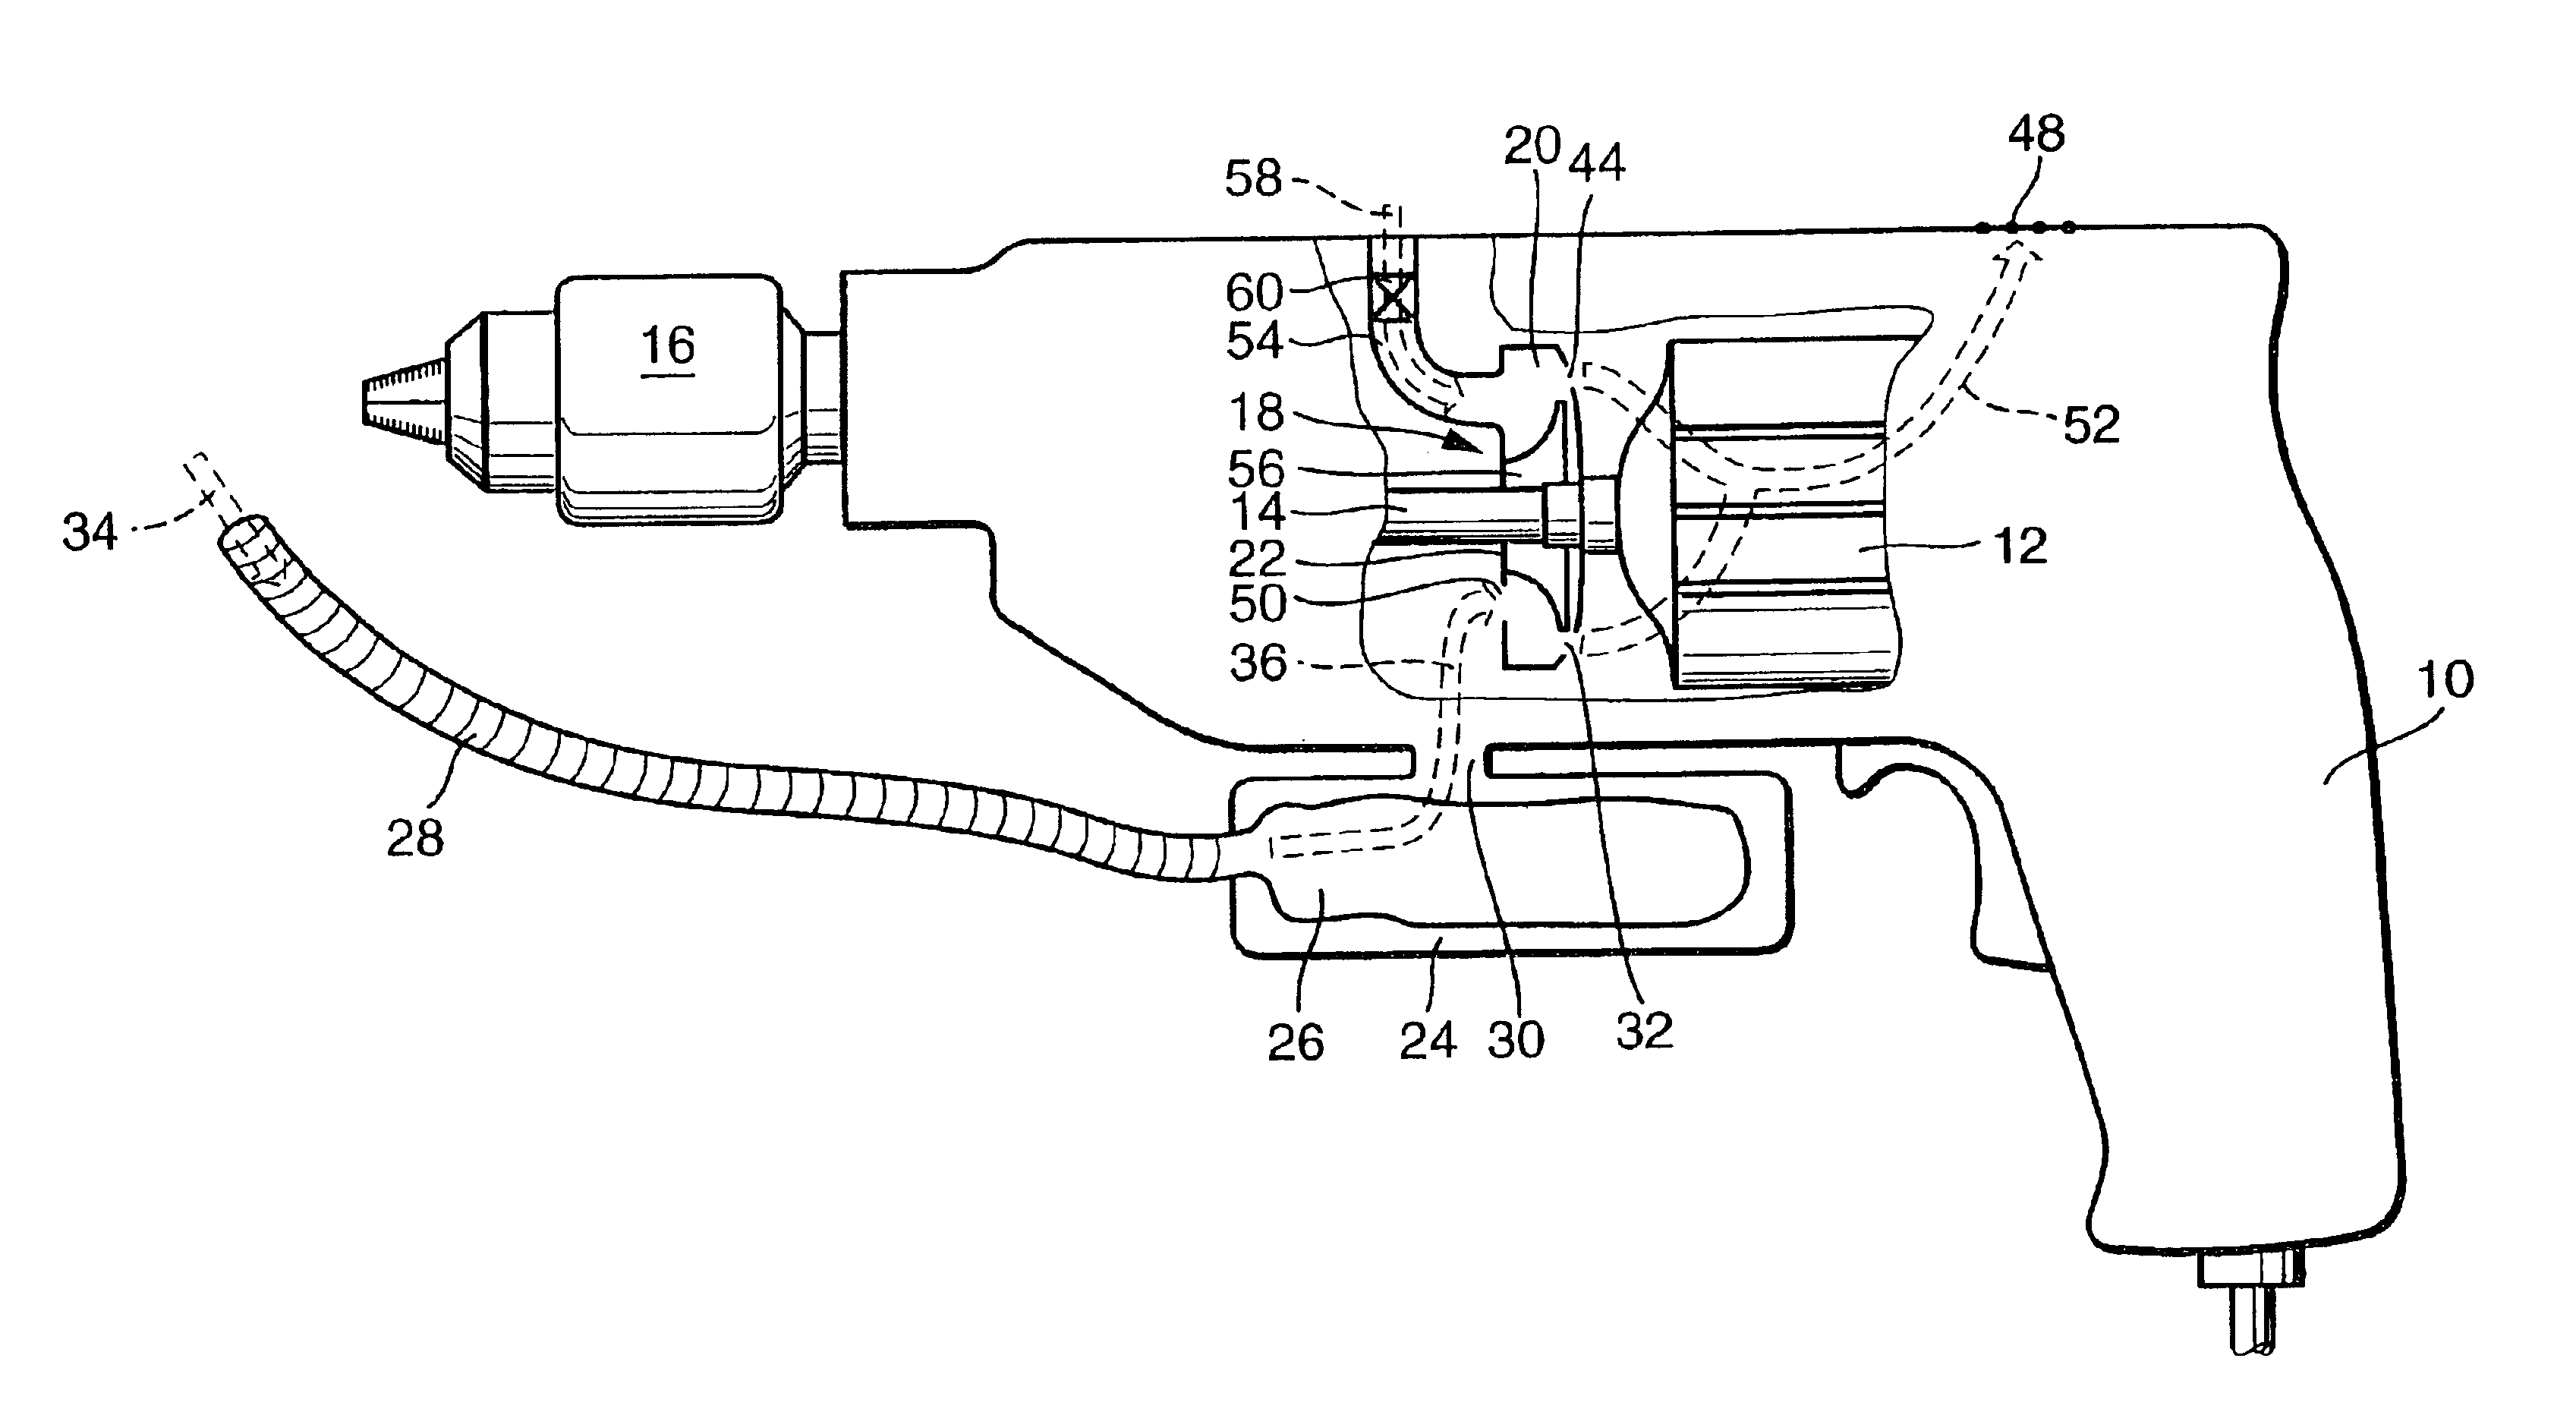 Hand tool comprising a dust suction device